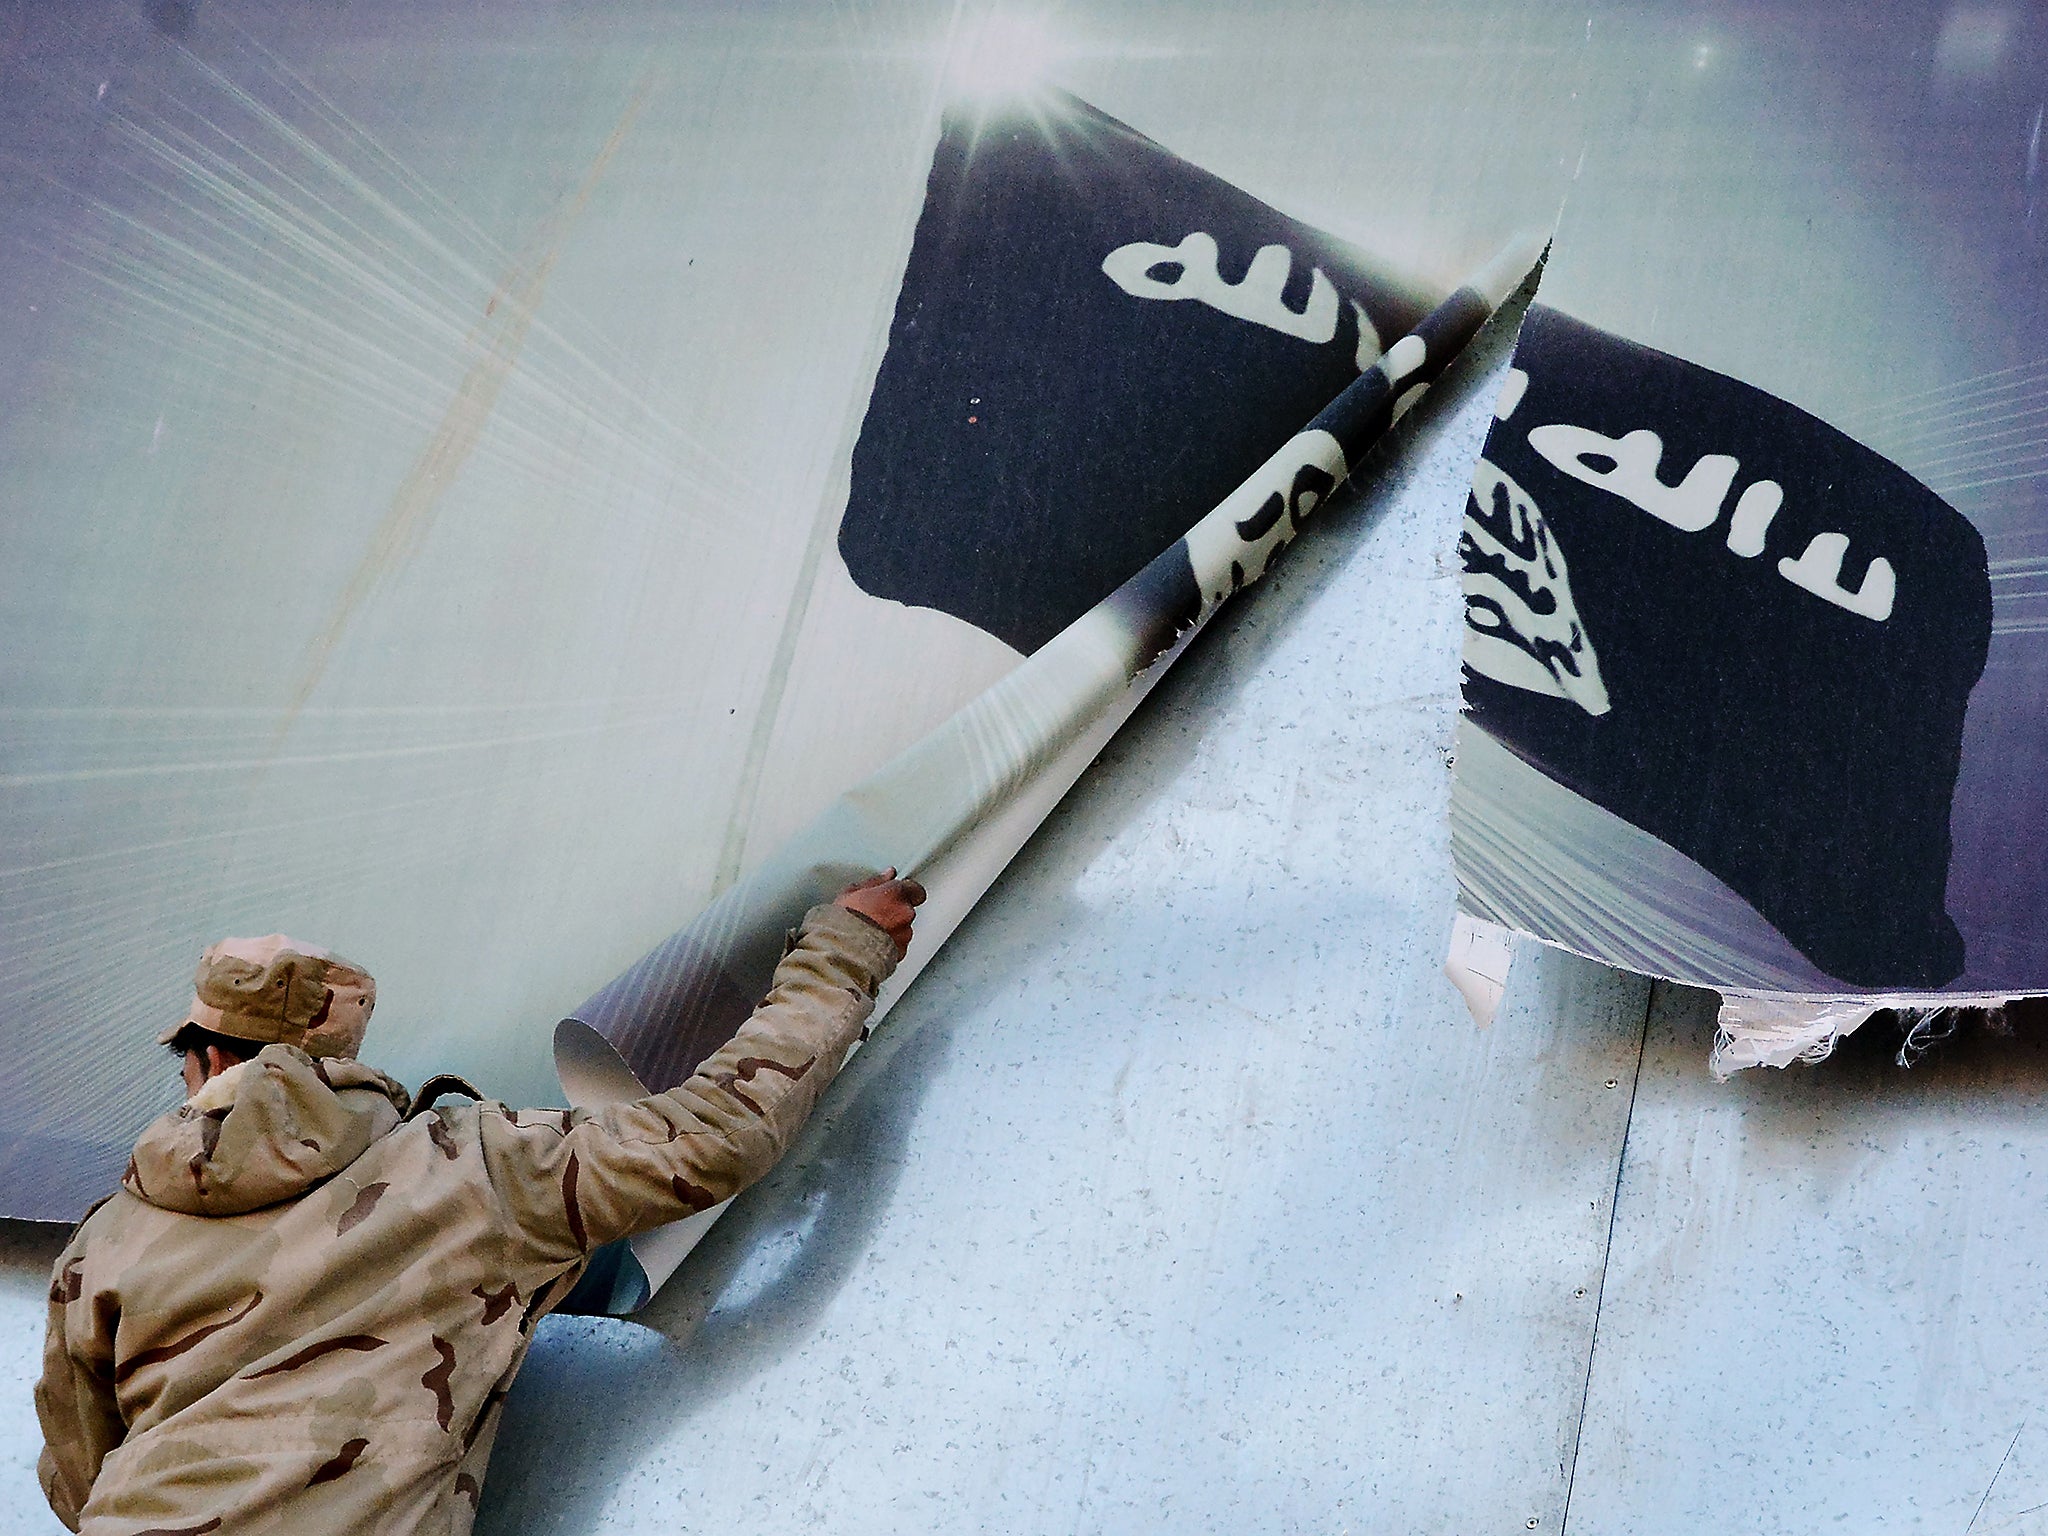 Isis appears to be preparing for military defeat in its strongholds in Syria and Iraq